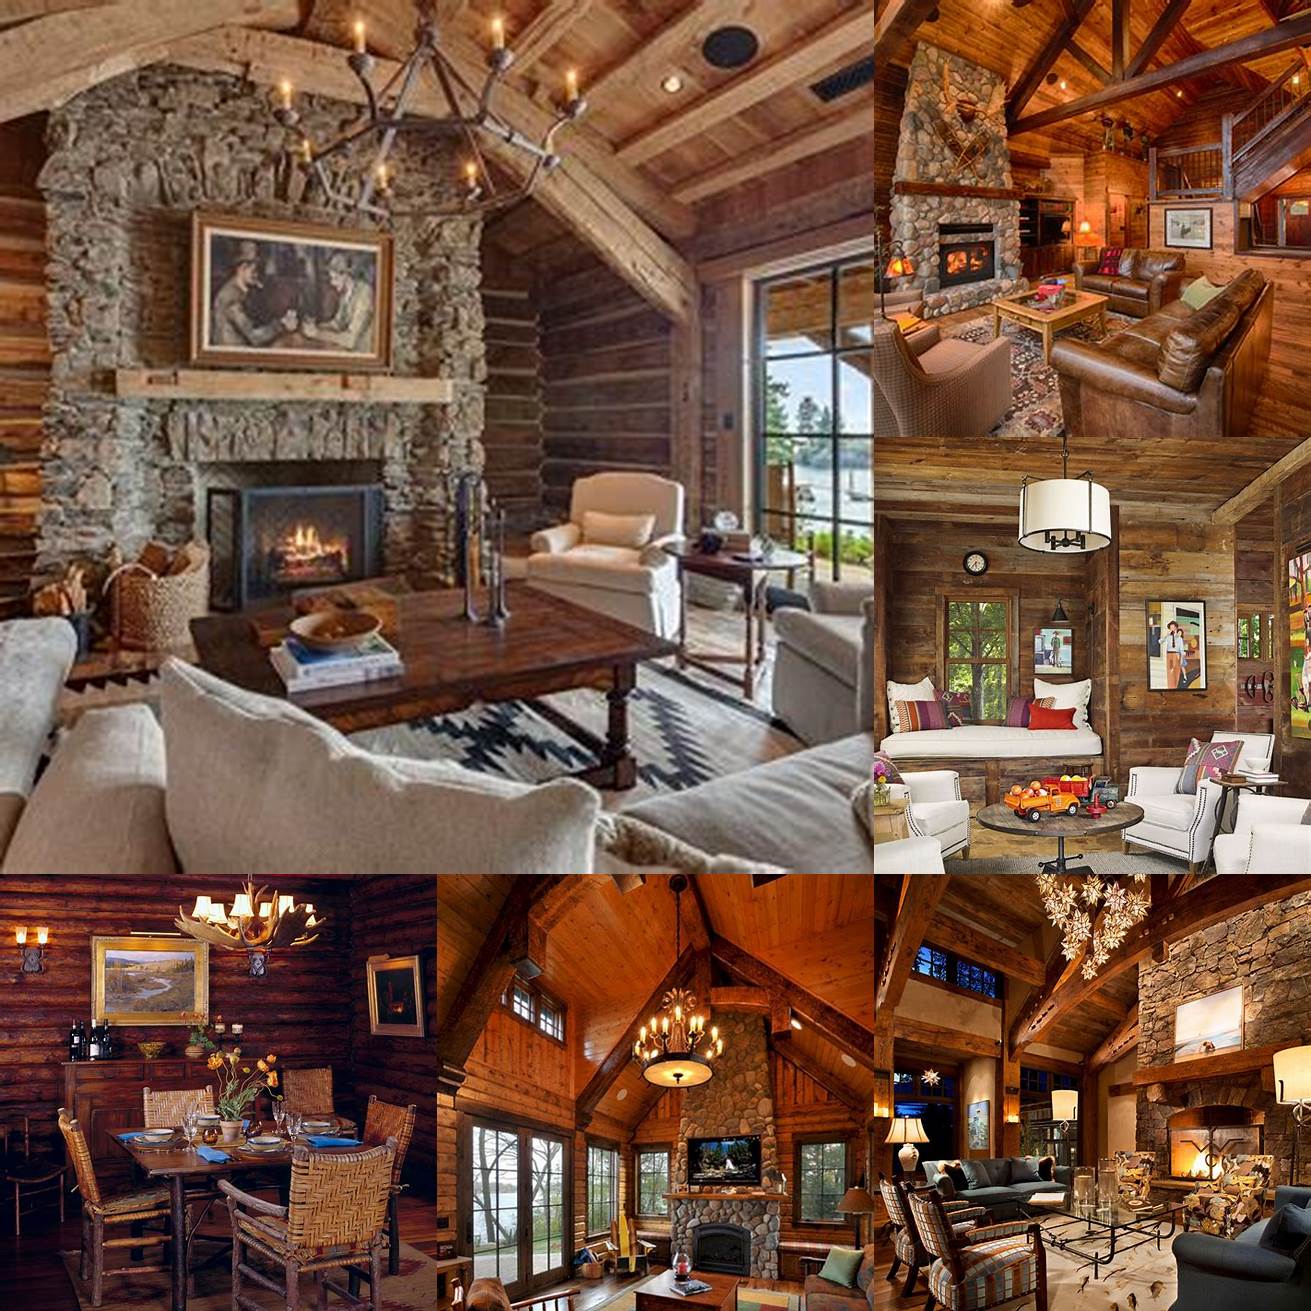 Cozy and rustic with wood accents